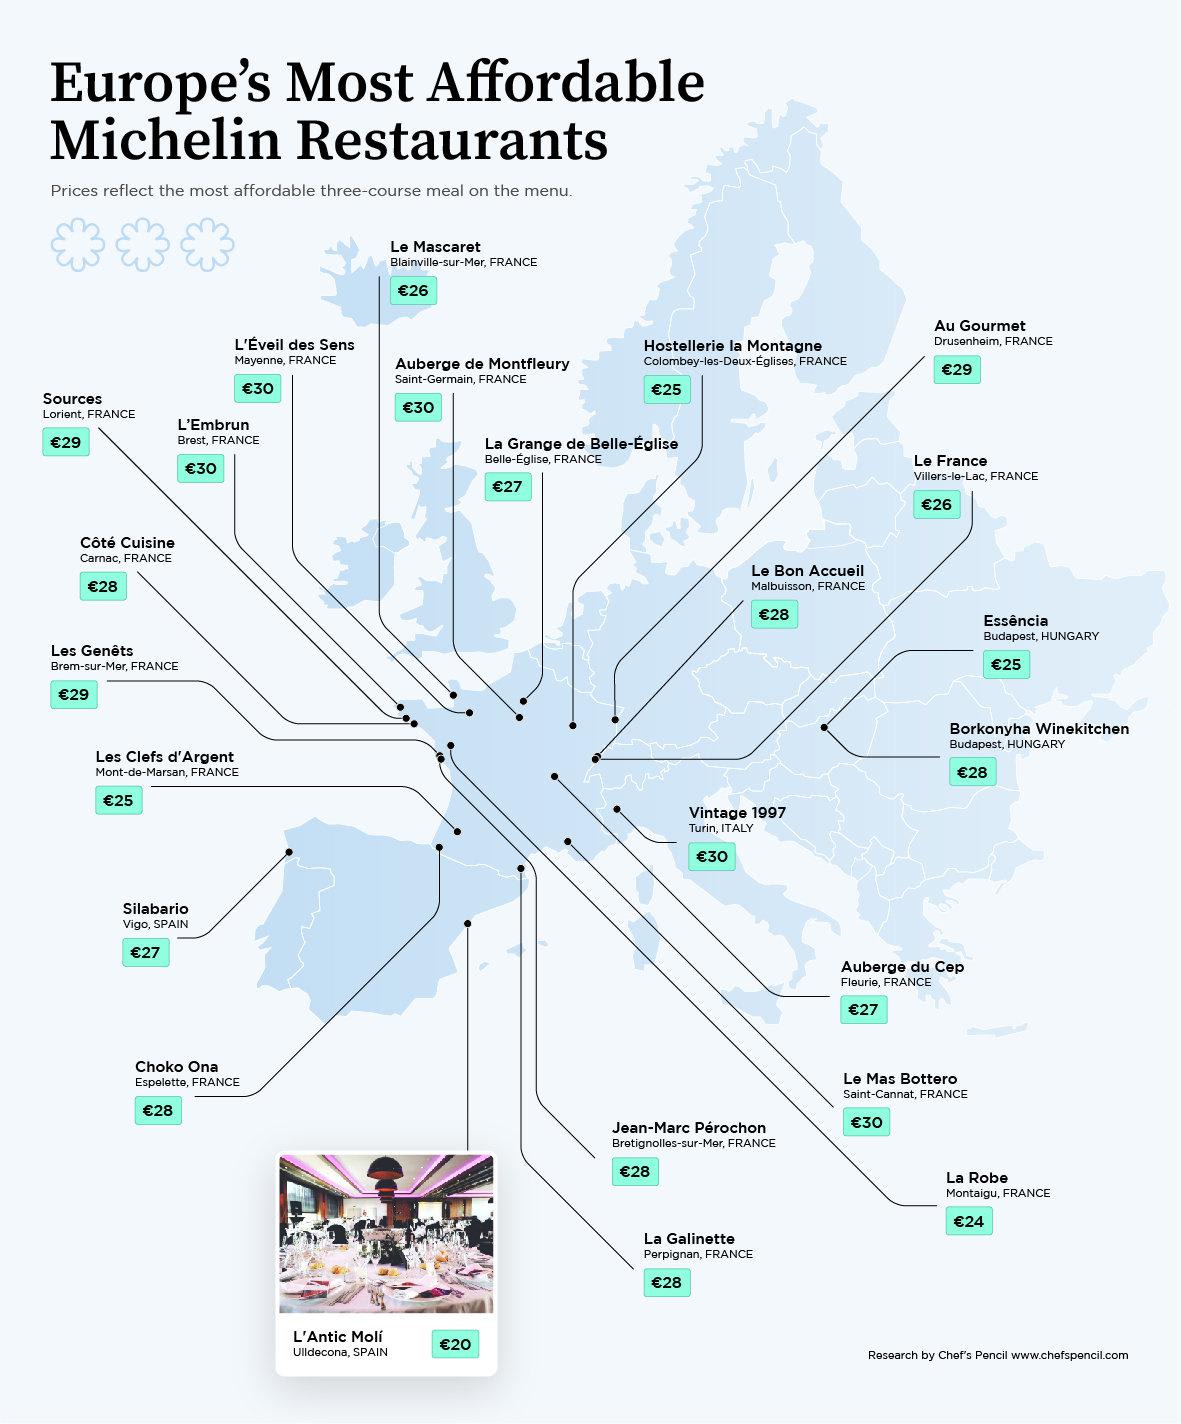 Most affordable Michelin restaurants in Europe